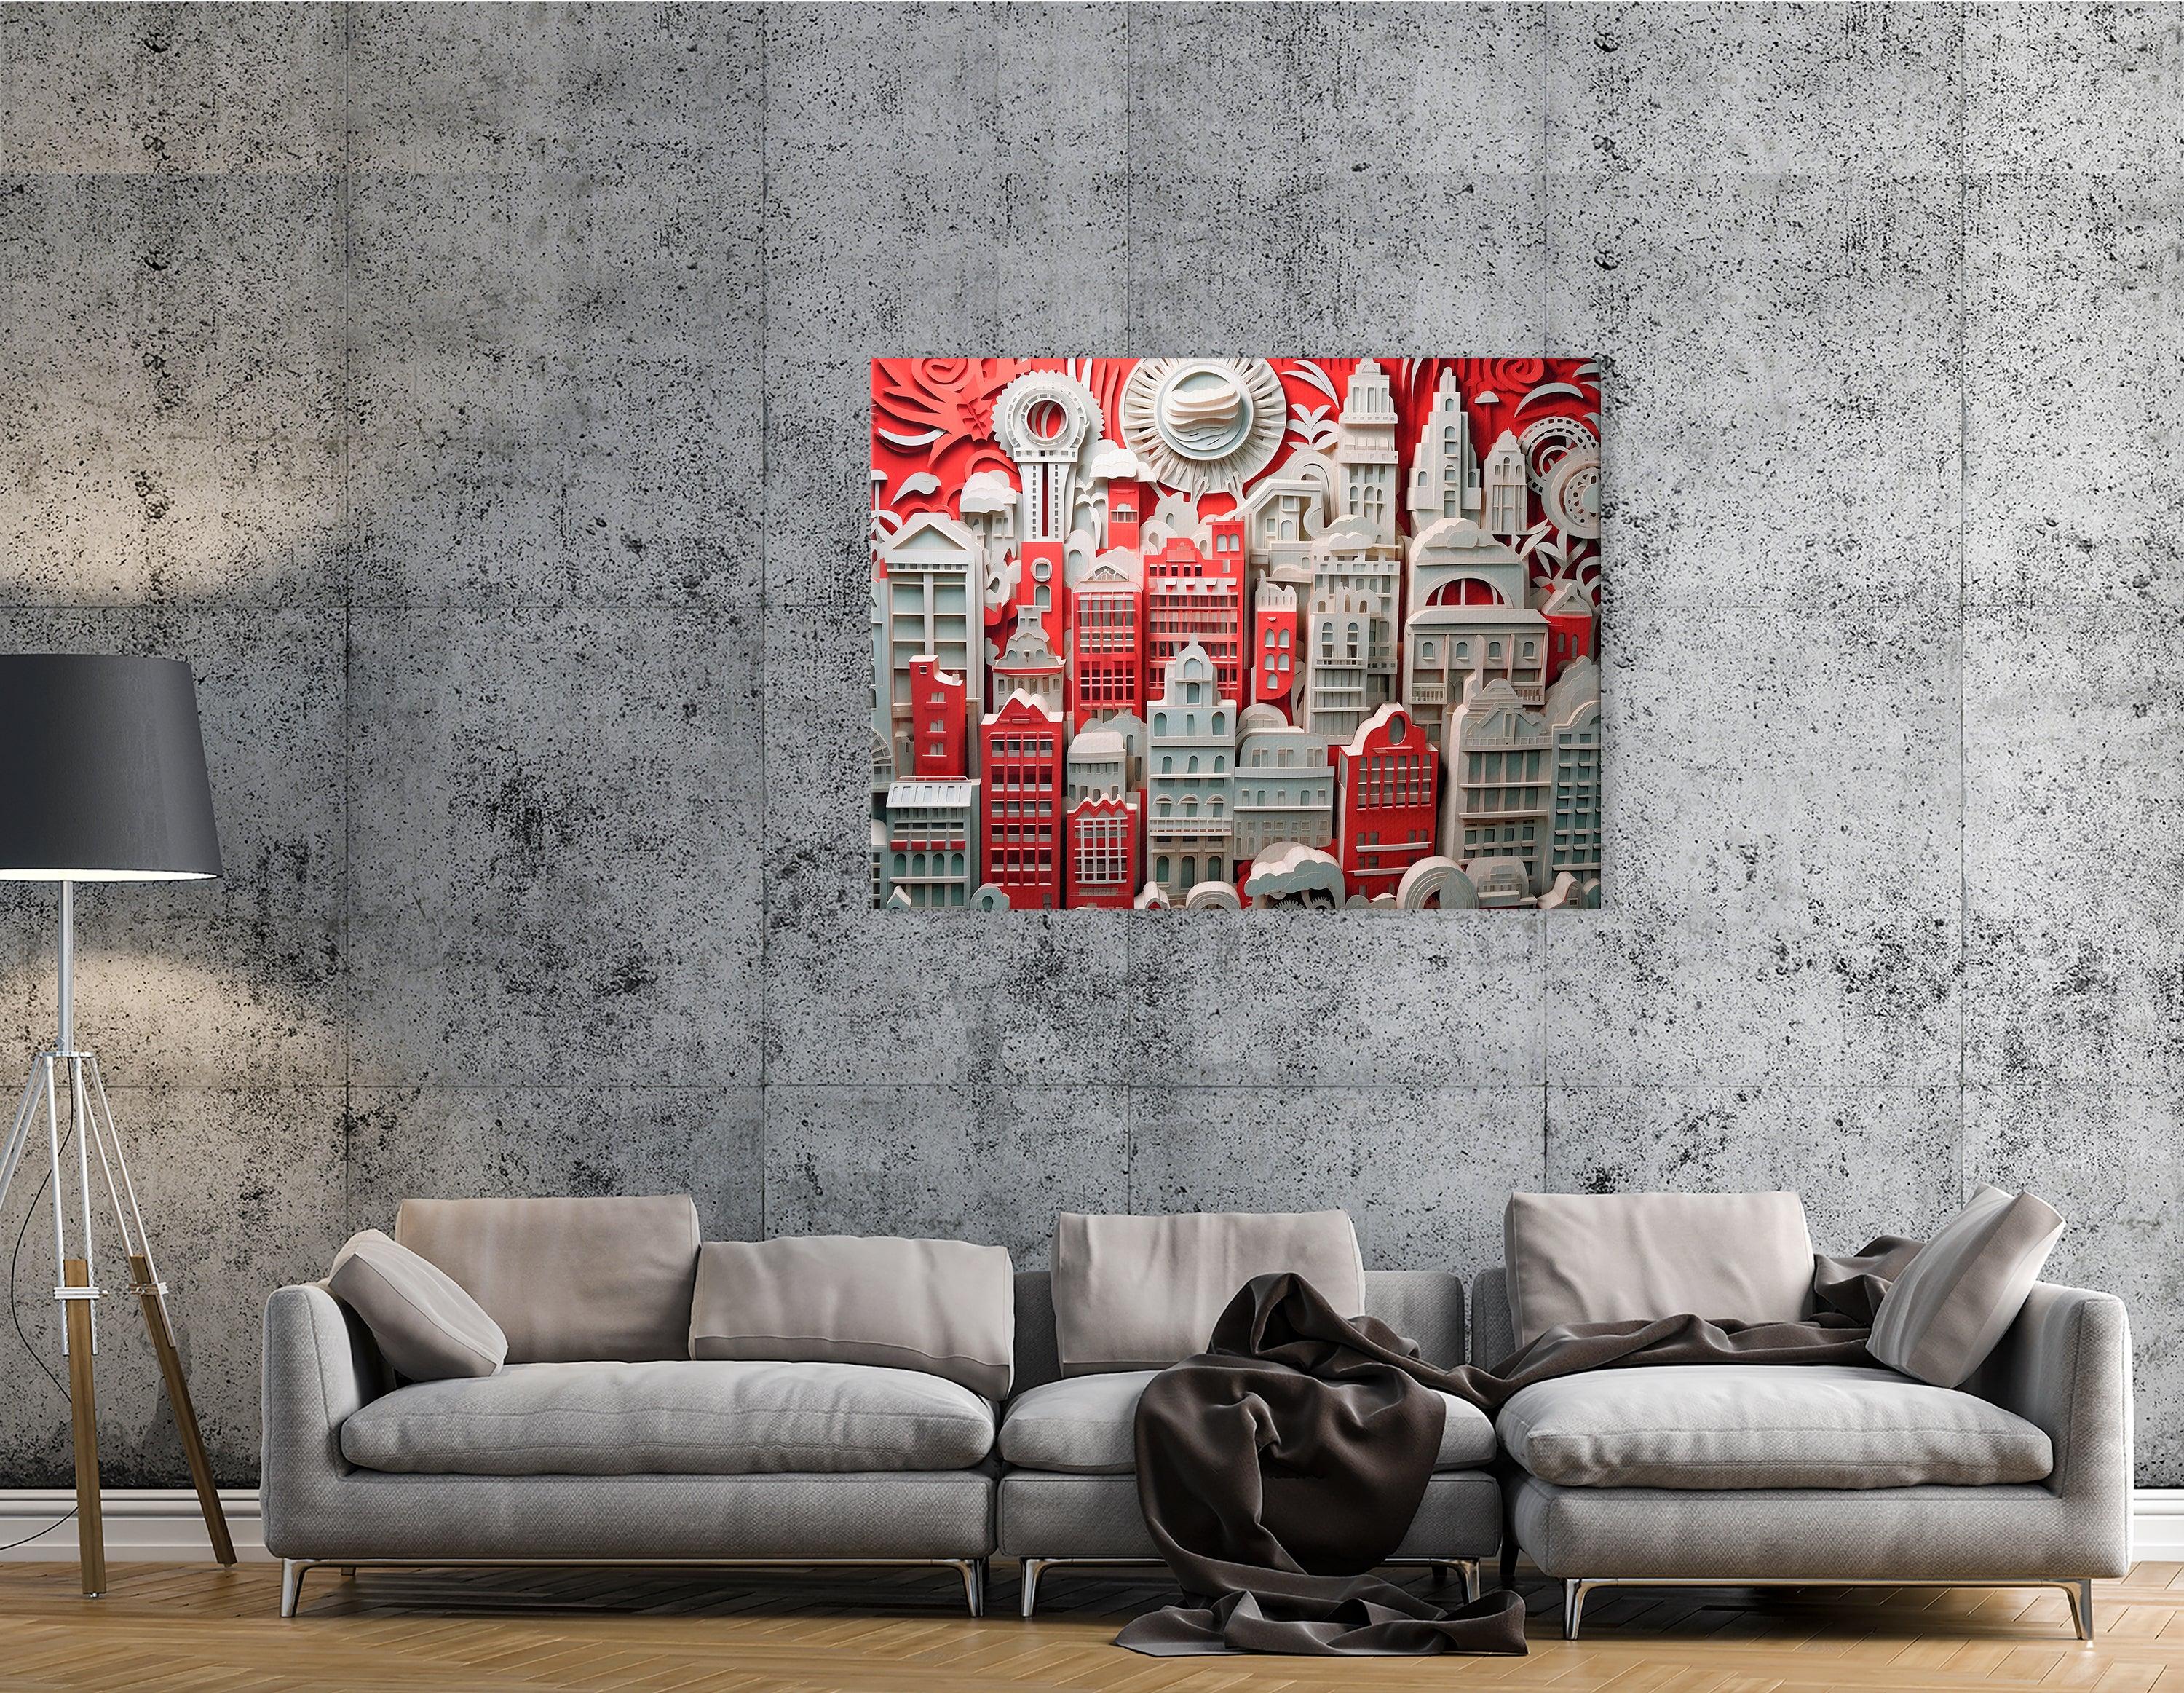 Urban Scenes Canvas Print in Red and White Paper - Canvas Print - Artoholica Ready to Hang Canvas Print